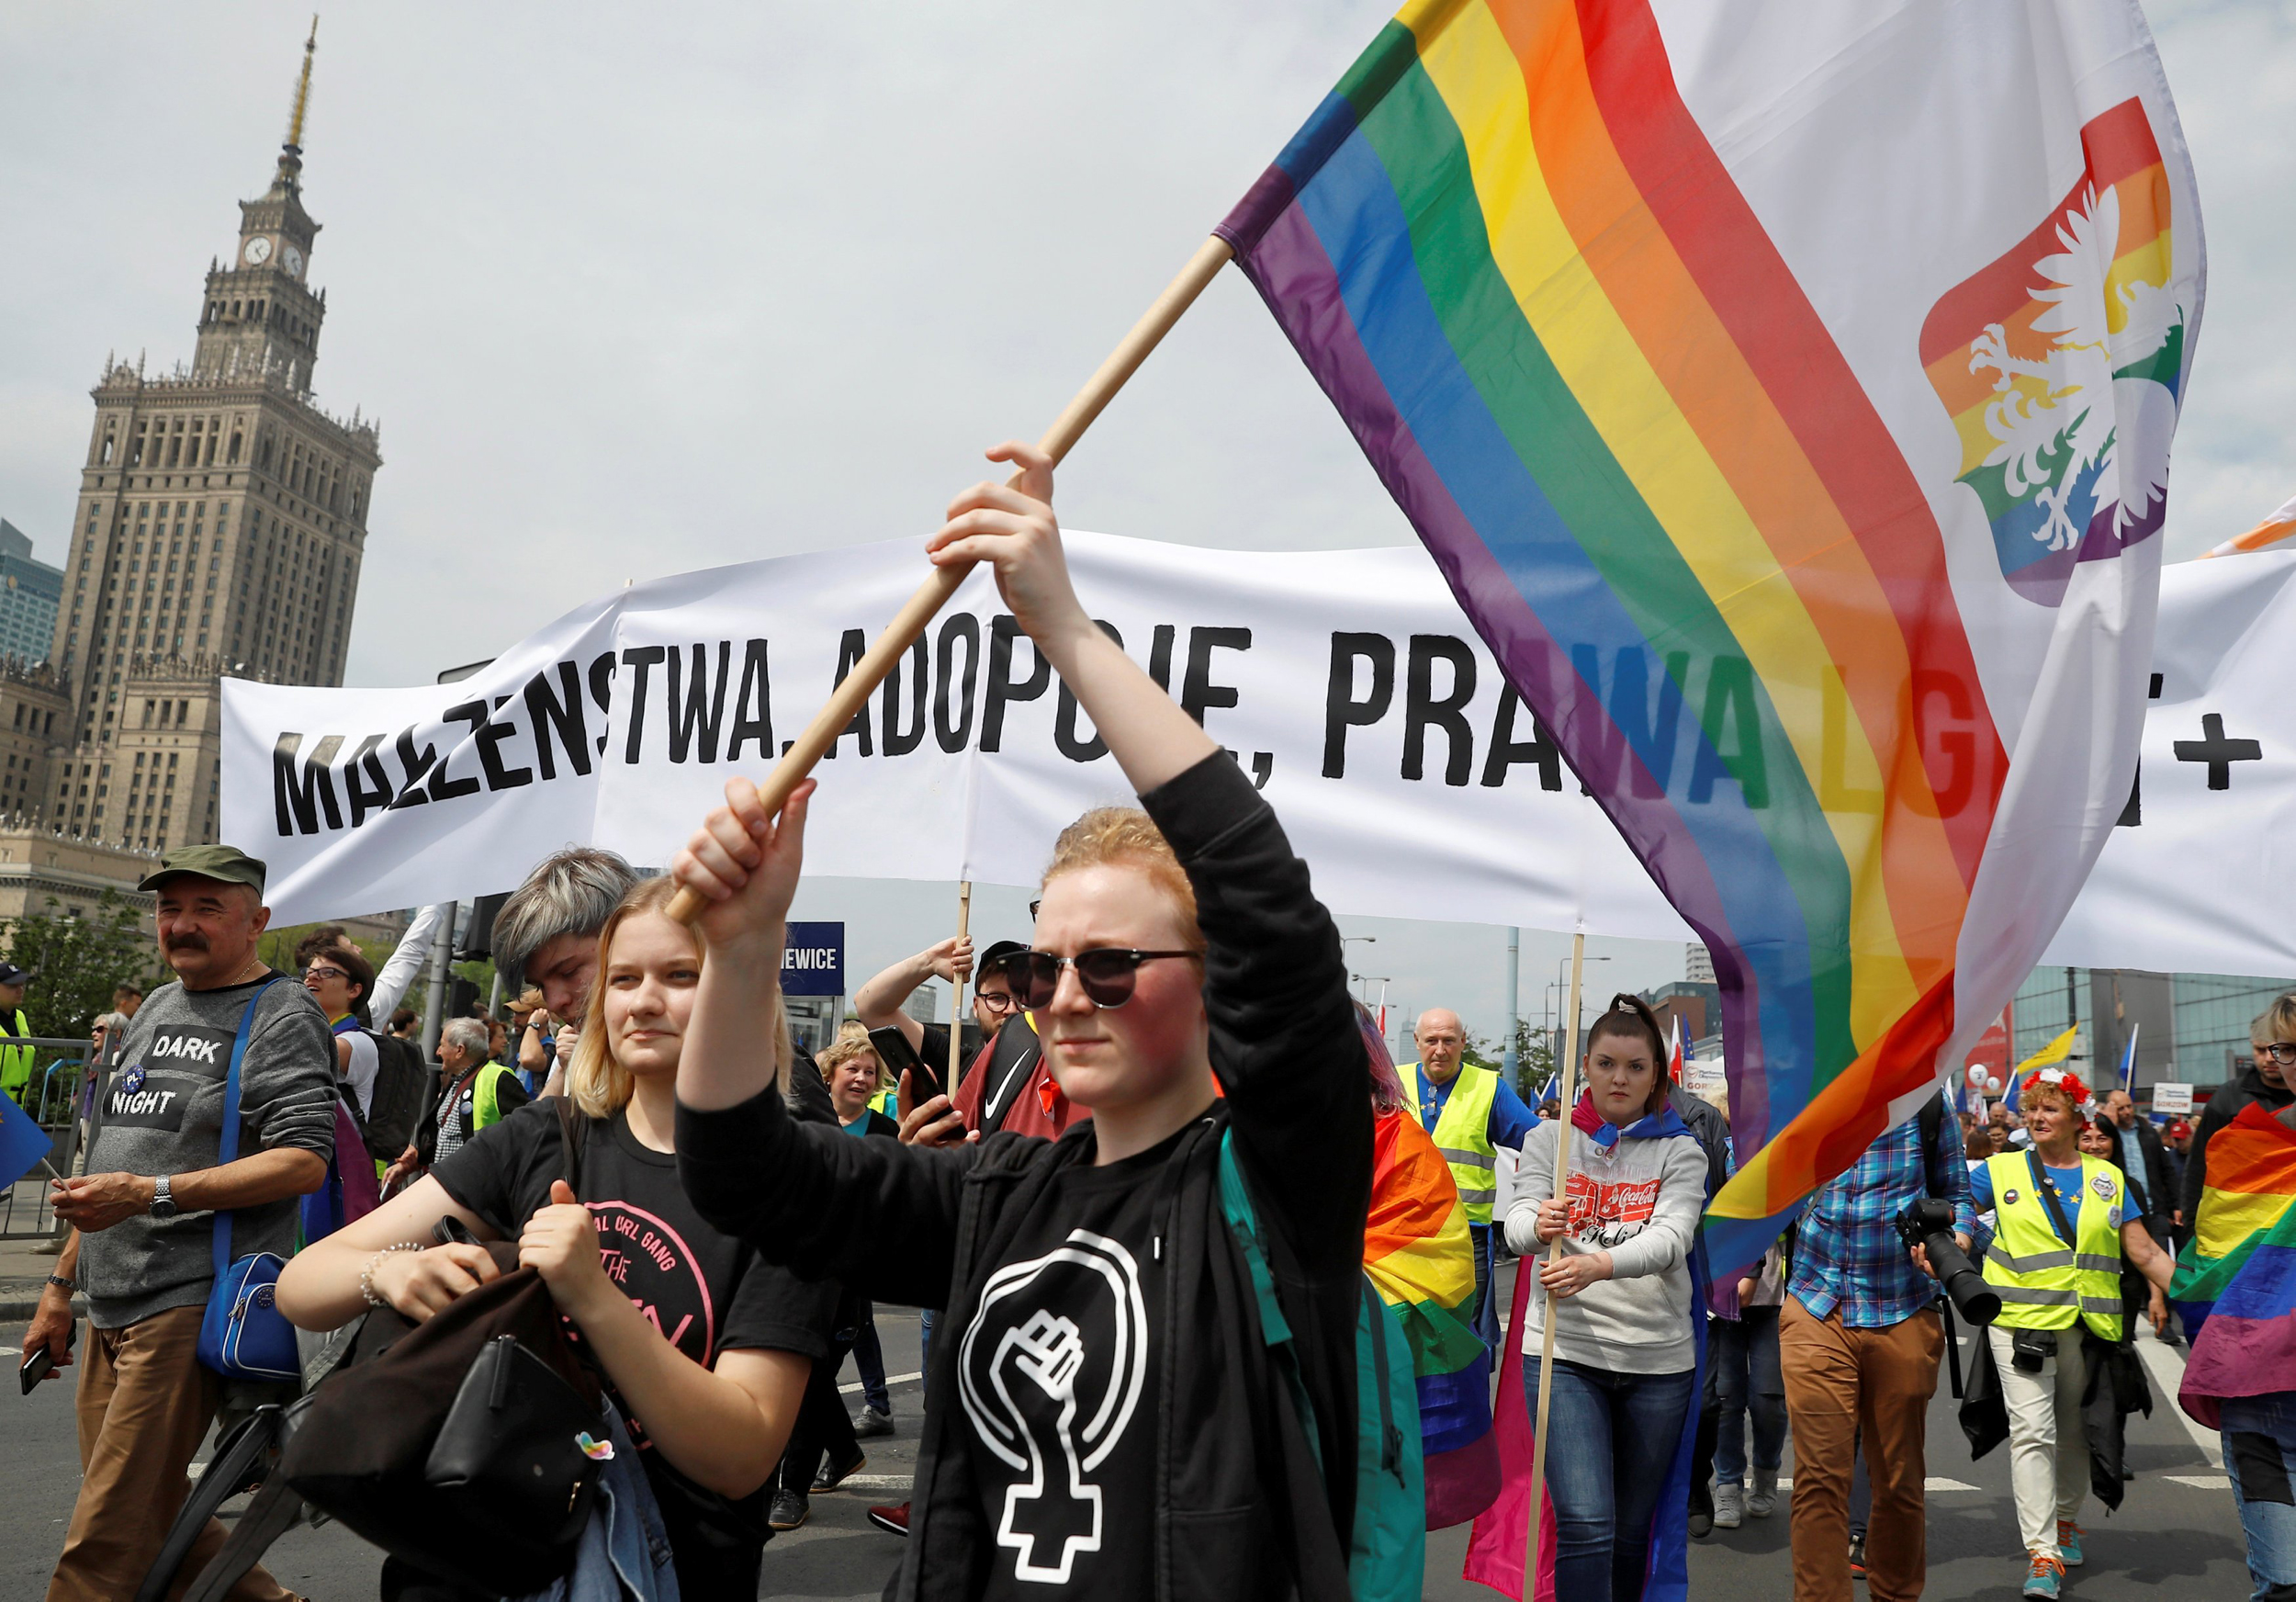 Within Poland '' LGBT FREE '' - Pride and More